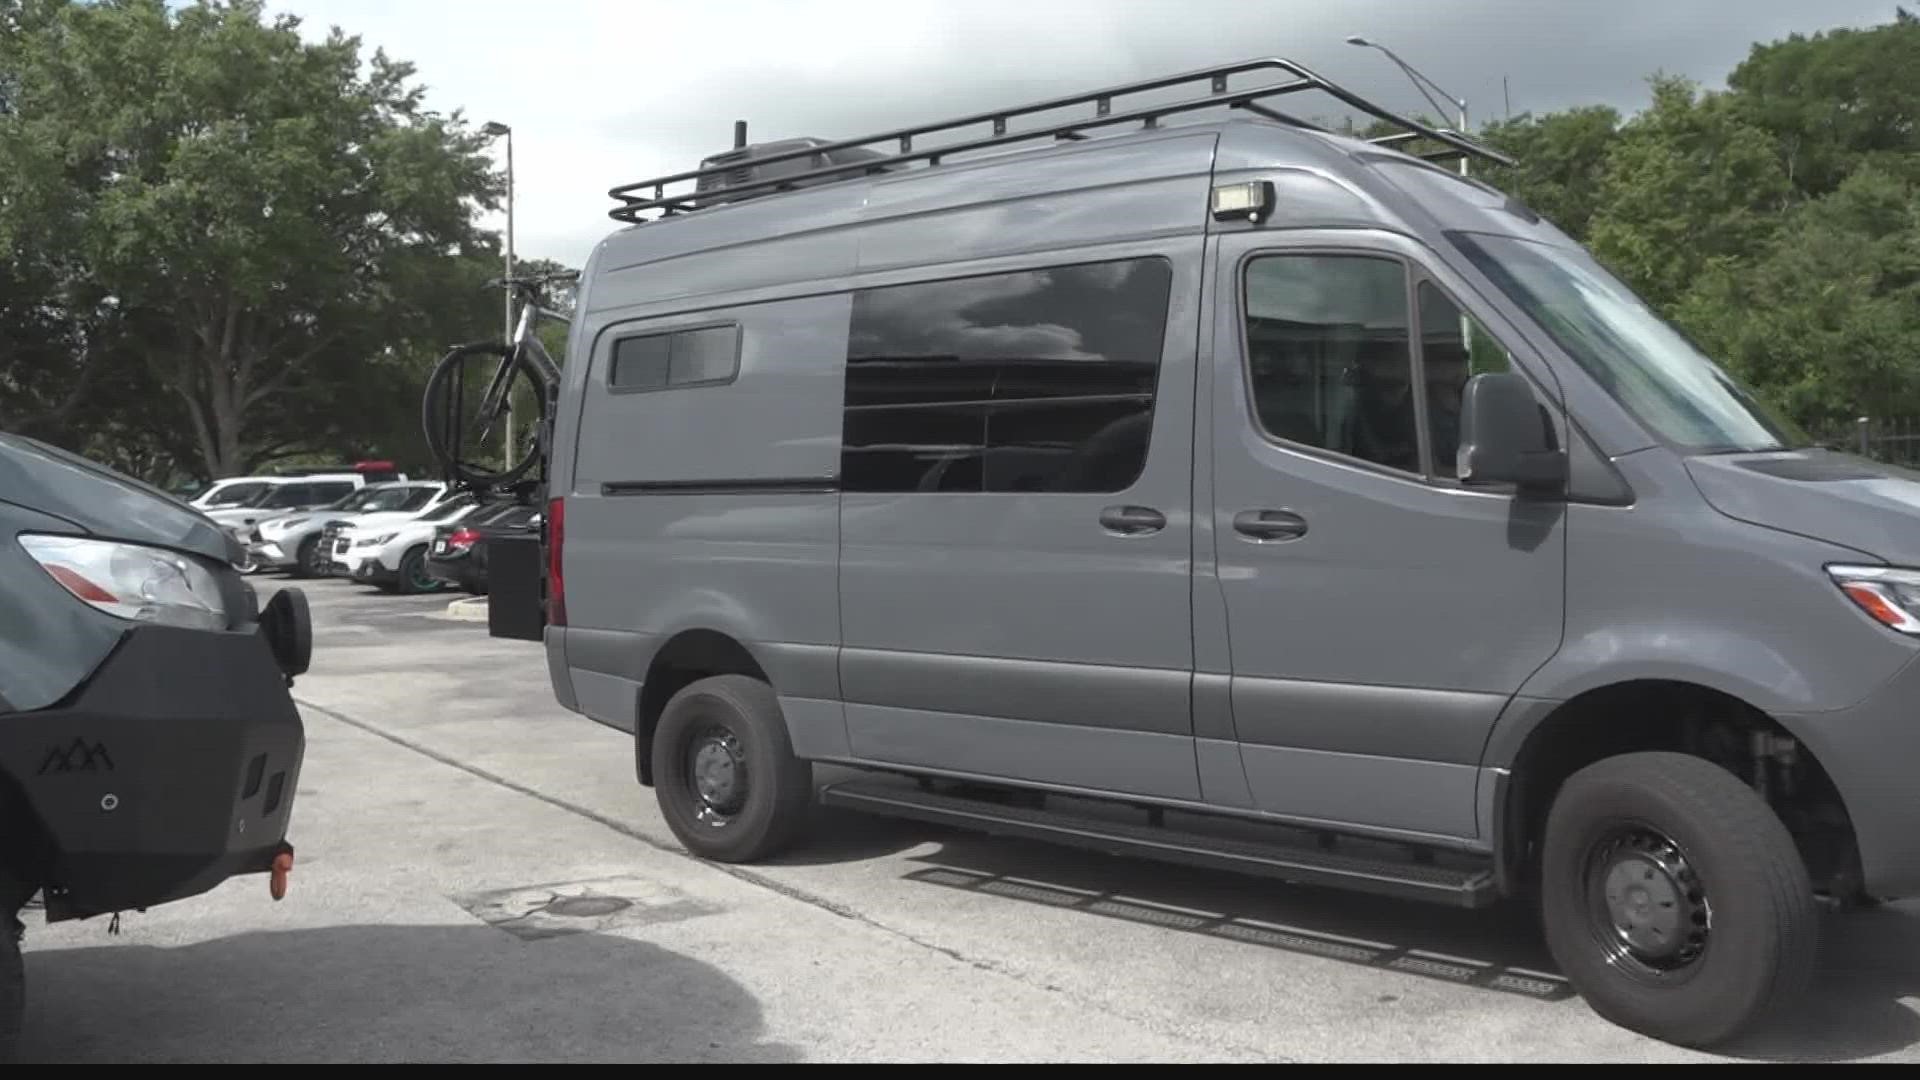 The Jacksonville business creates custom vans for people to live, travel or camp in.